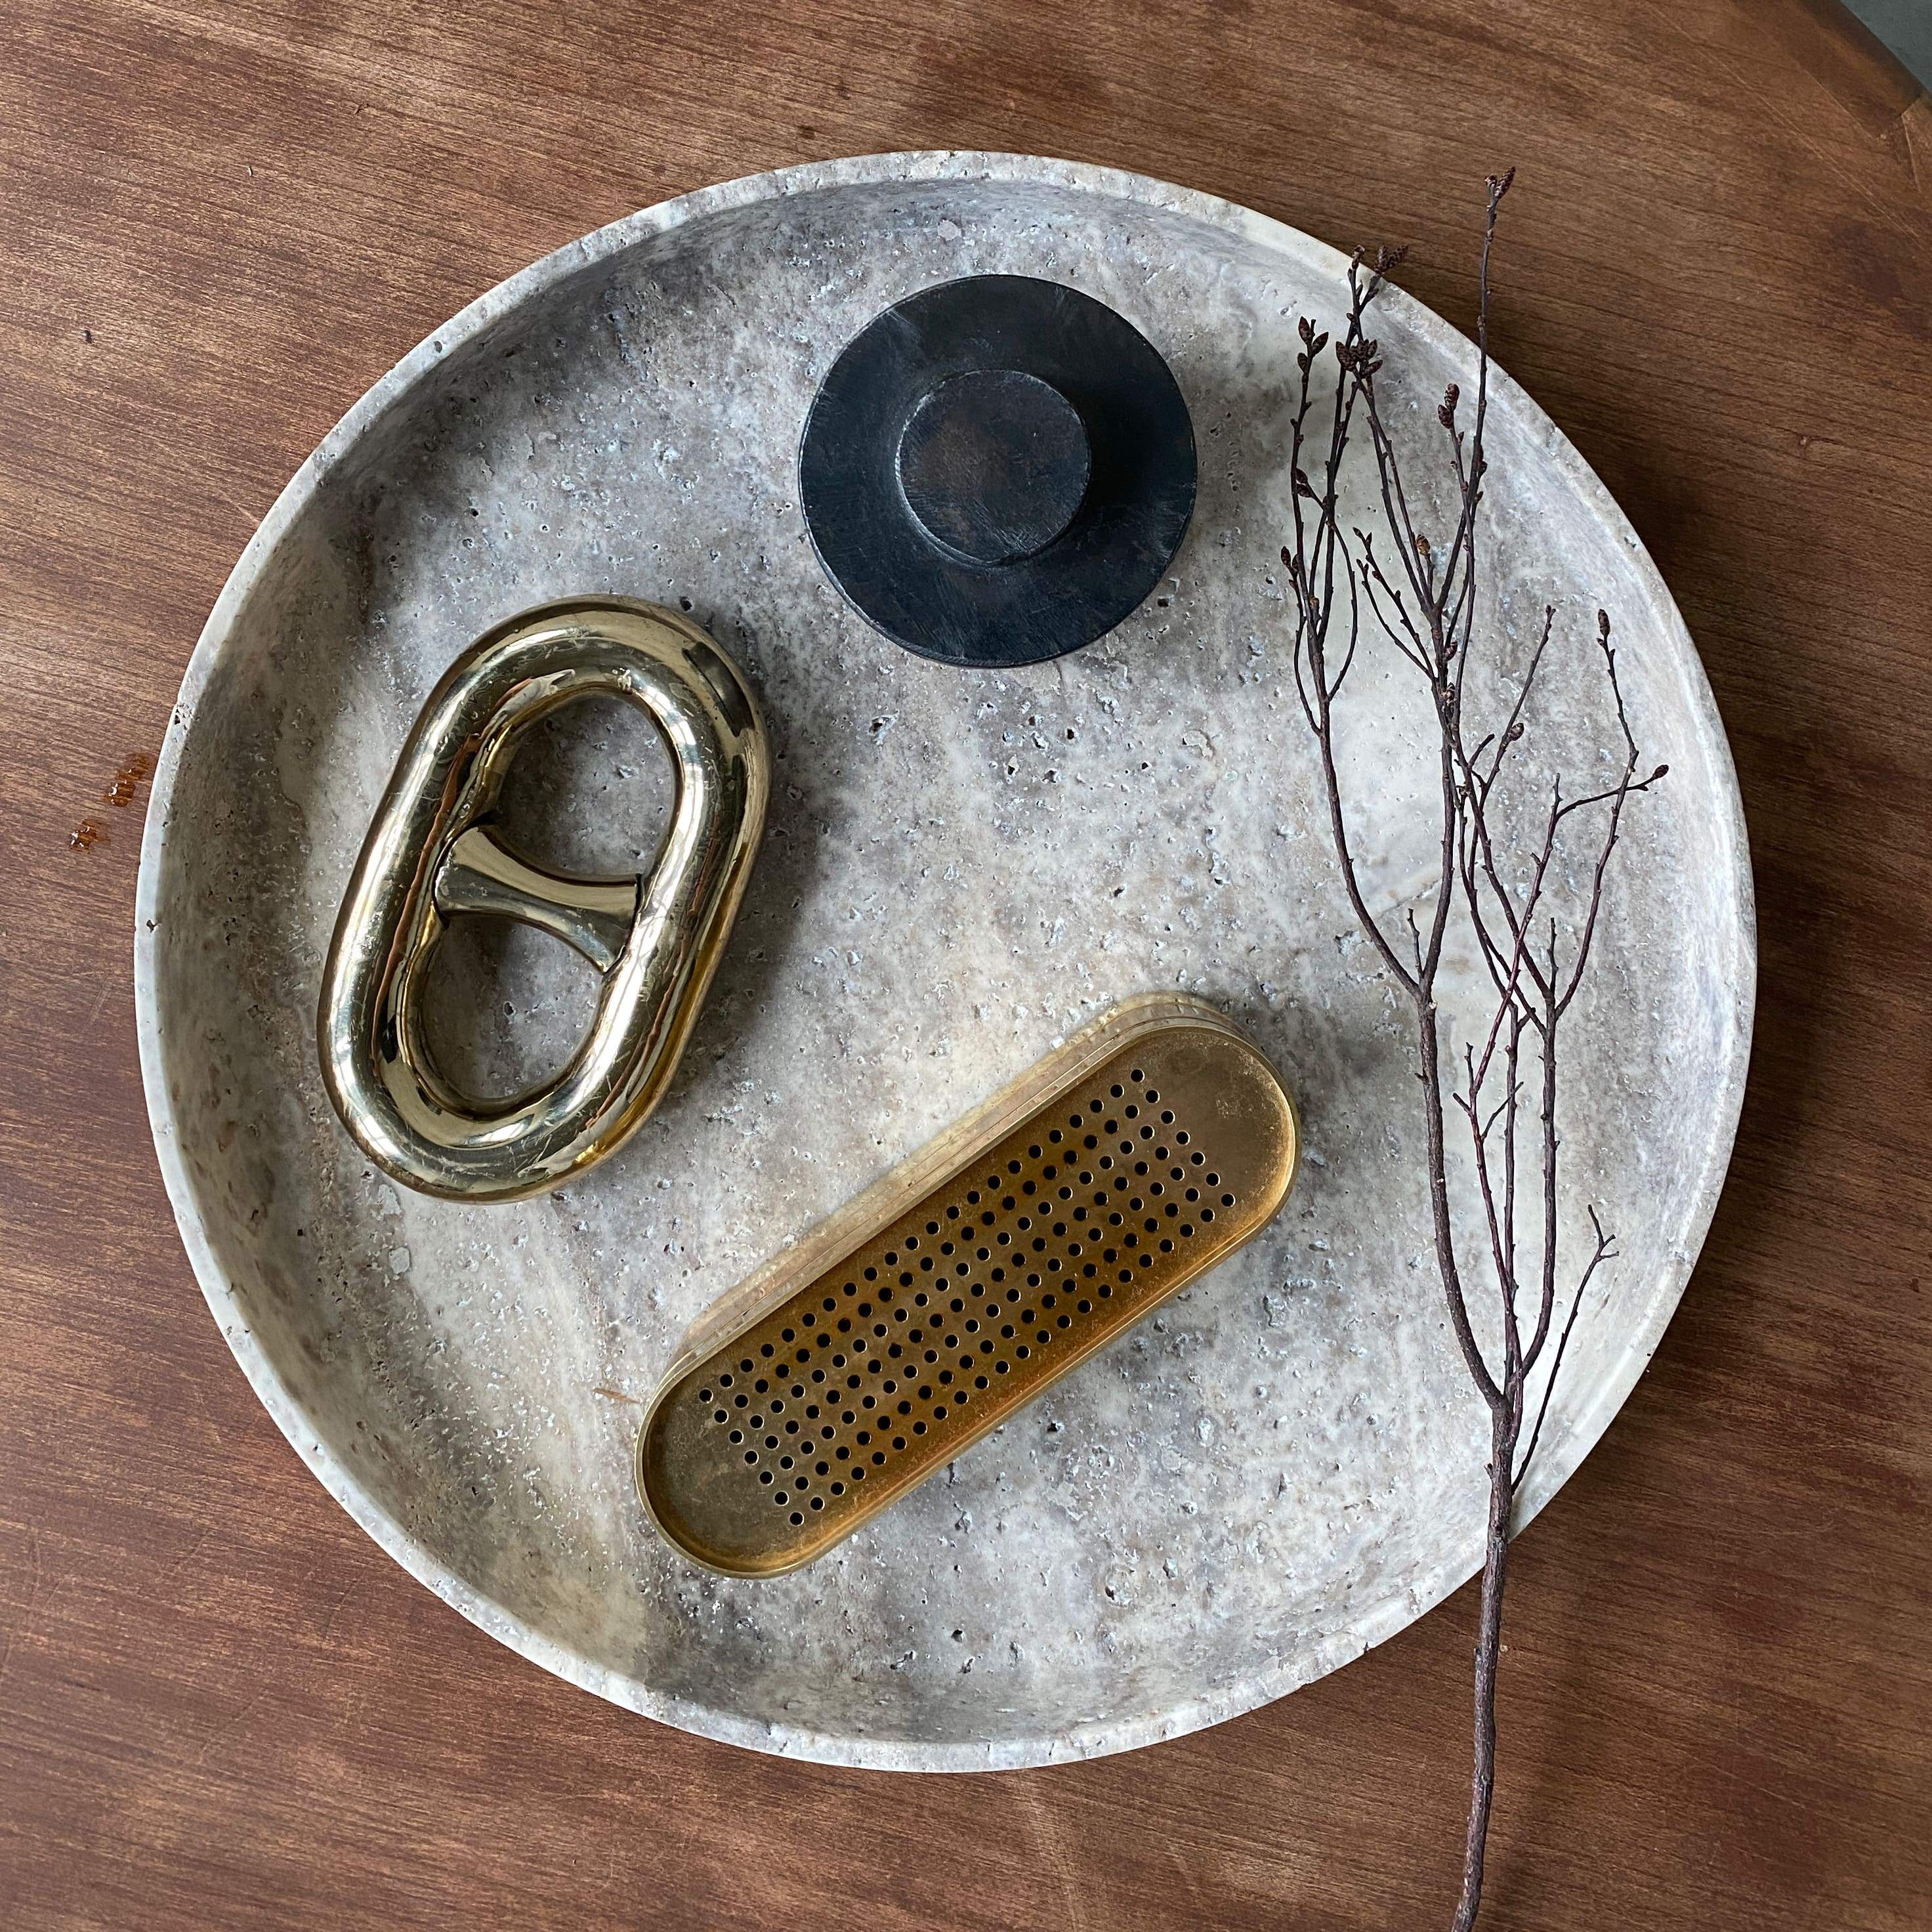 travertine stone round tray with incense burner and decor and accessories on wood table